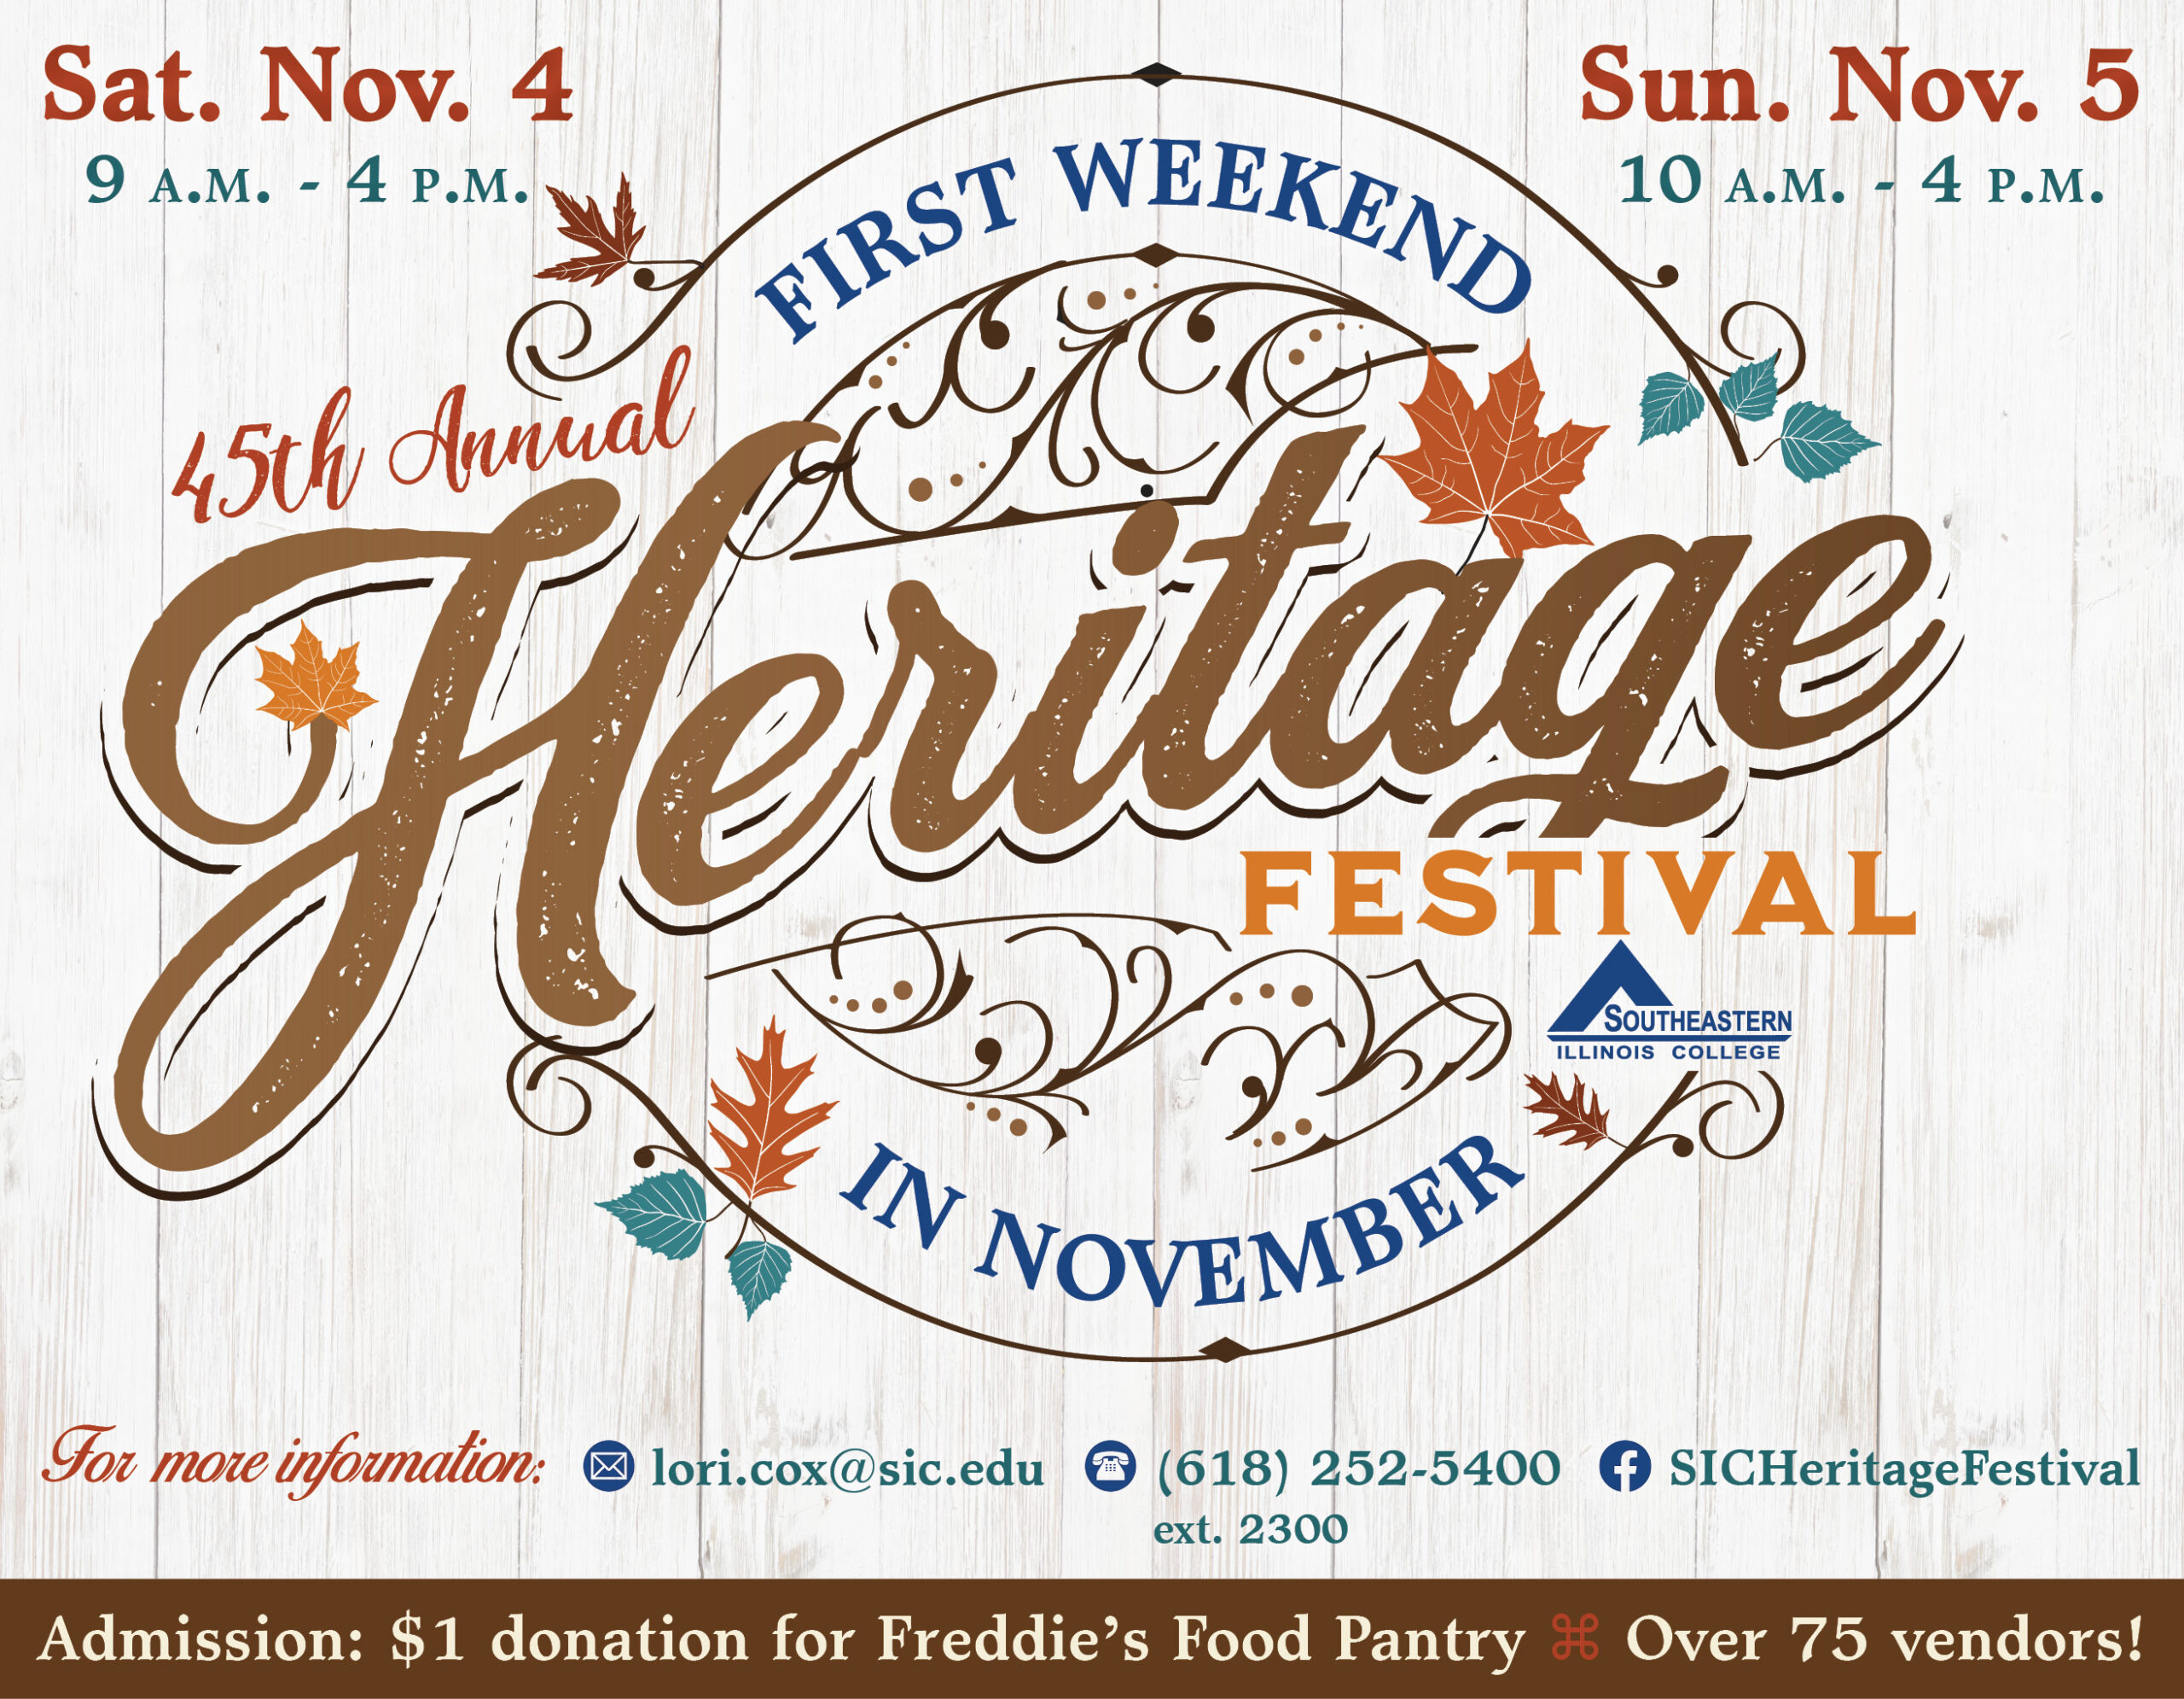 SIC Heritage Festival November 4 and 5.